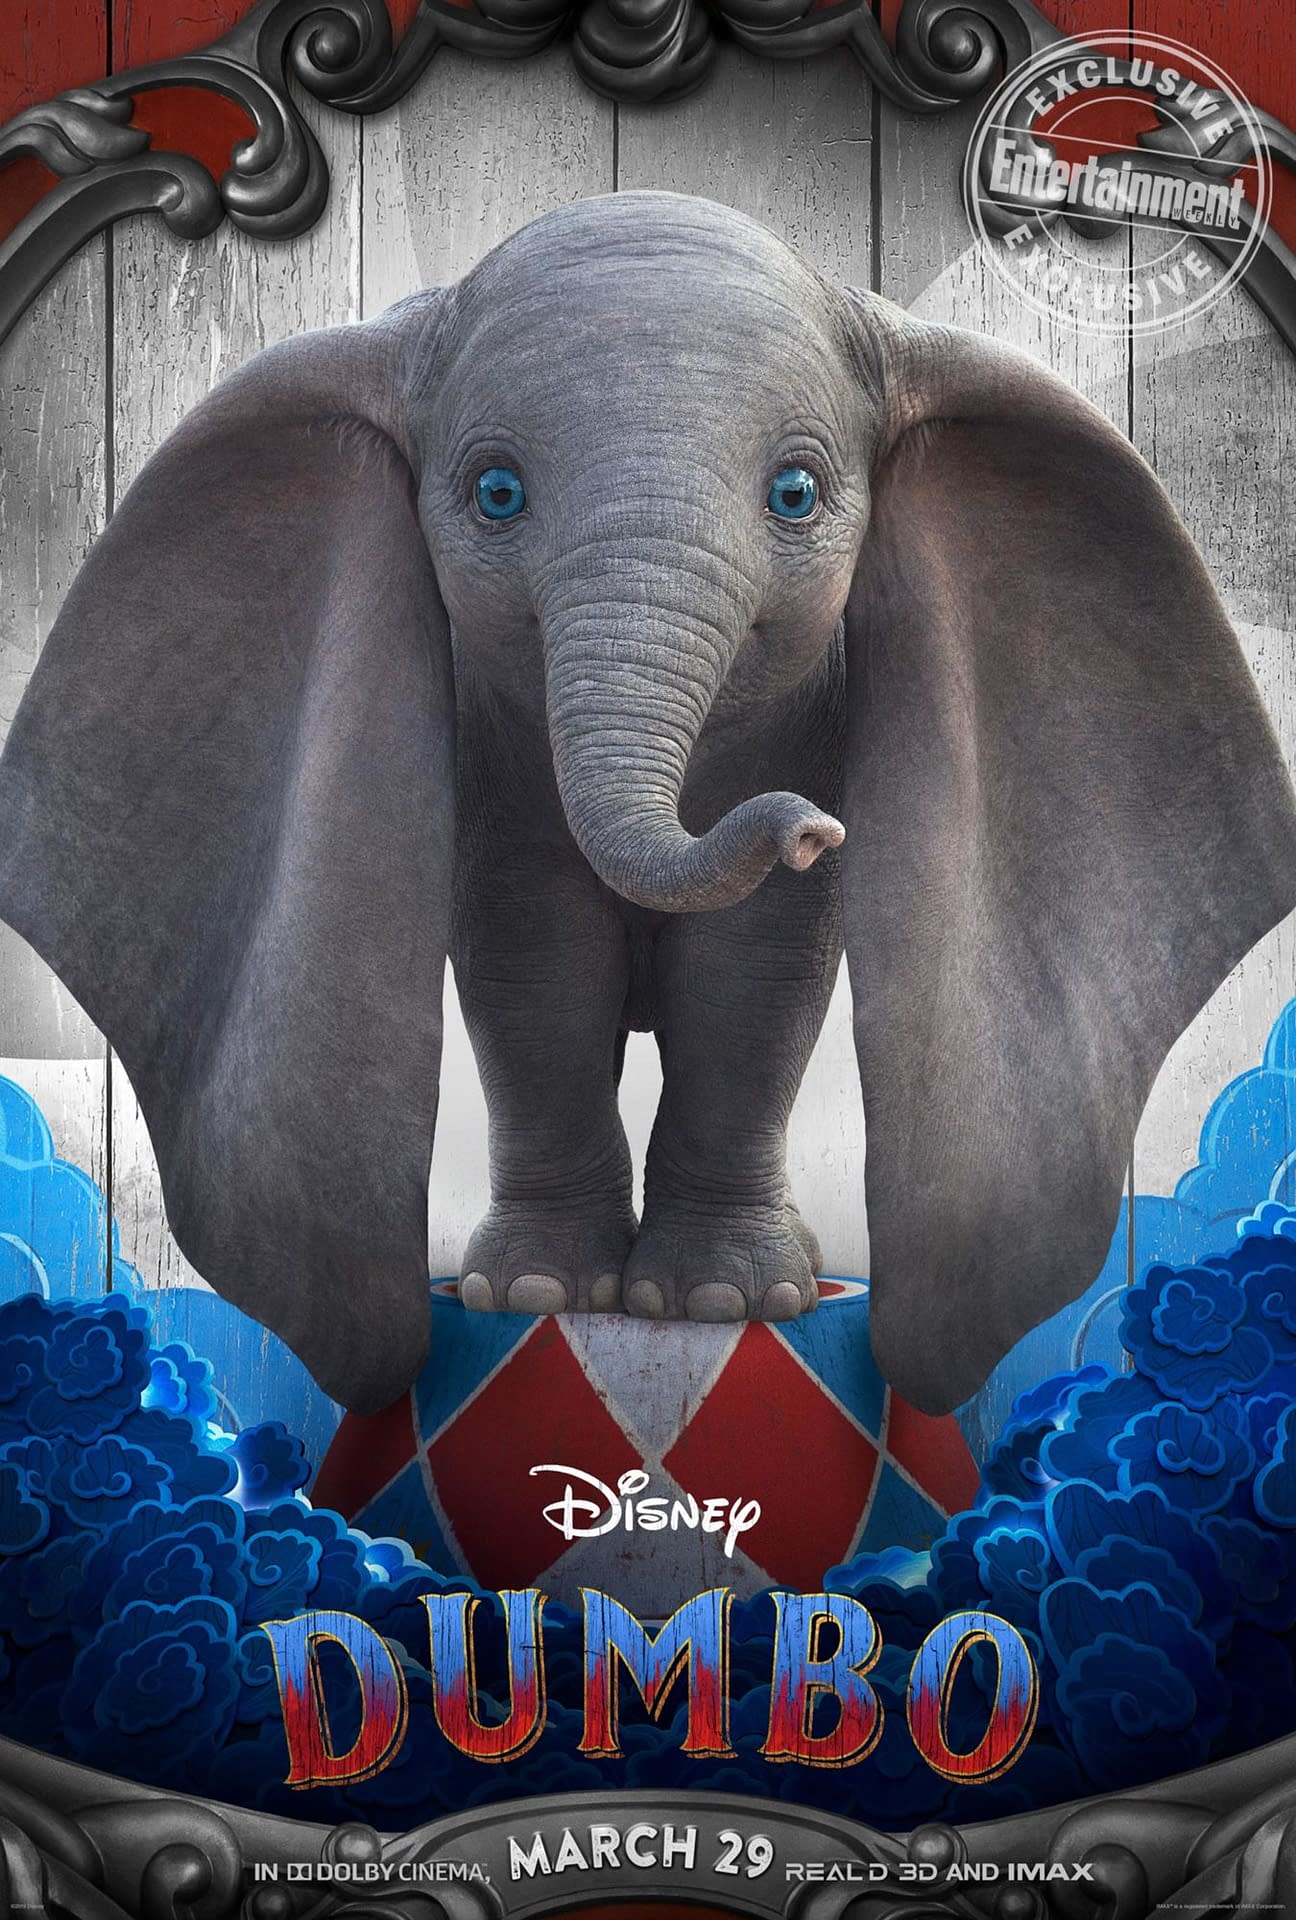 5 New Character Posters for the Live-Action Dumbo Remake